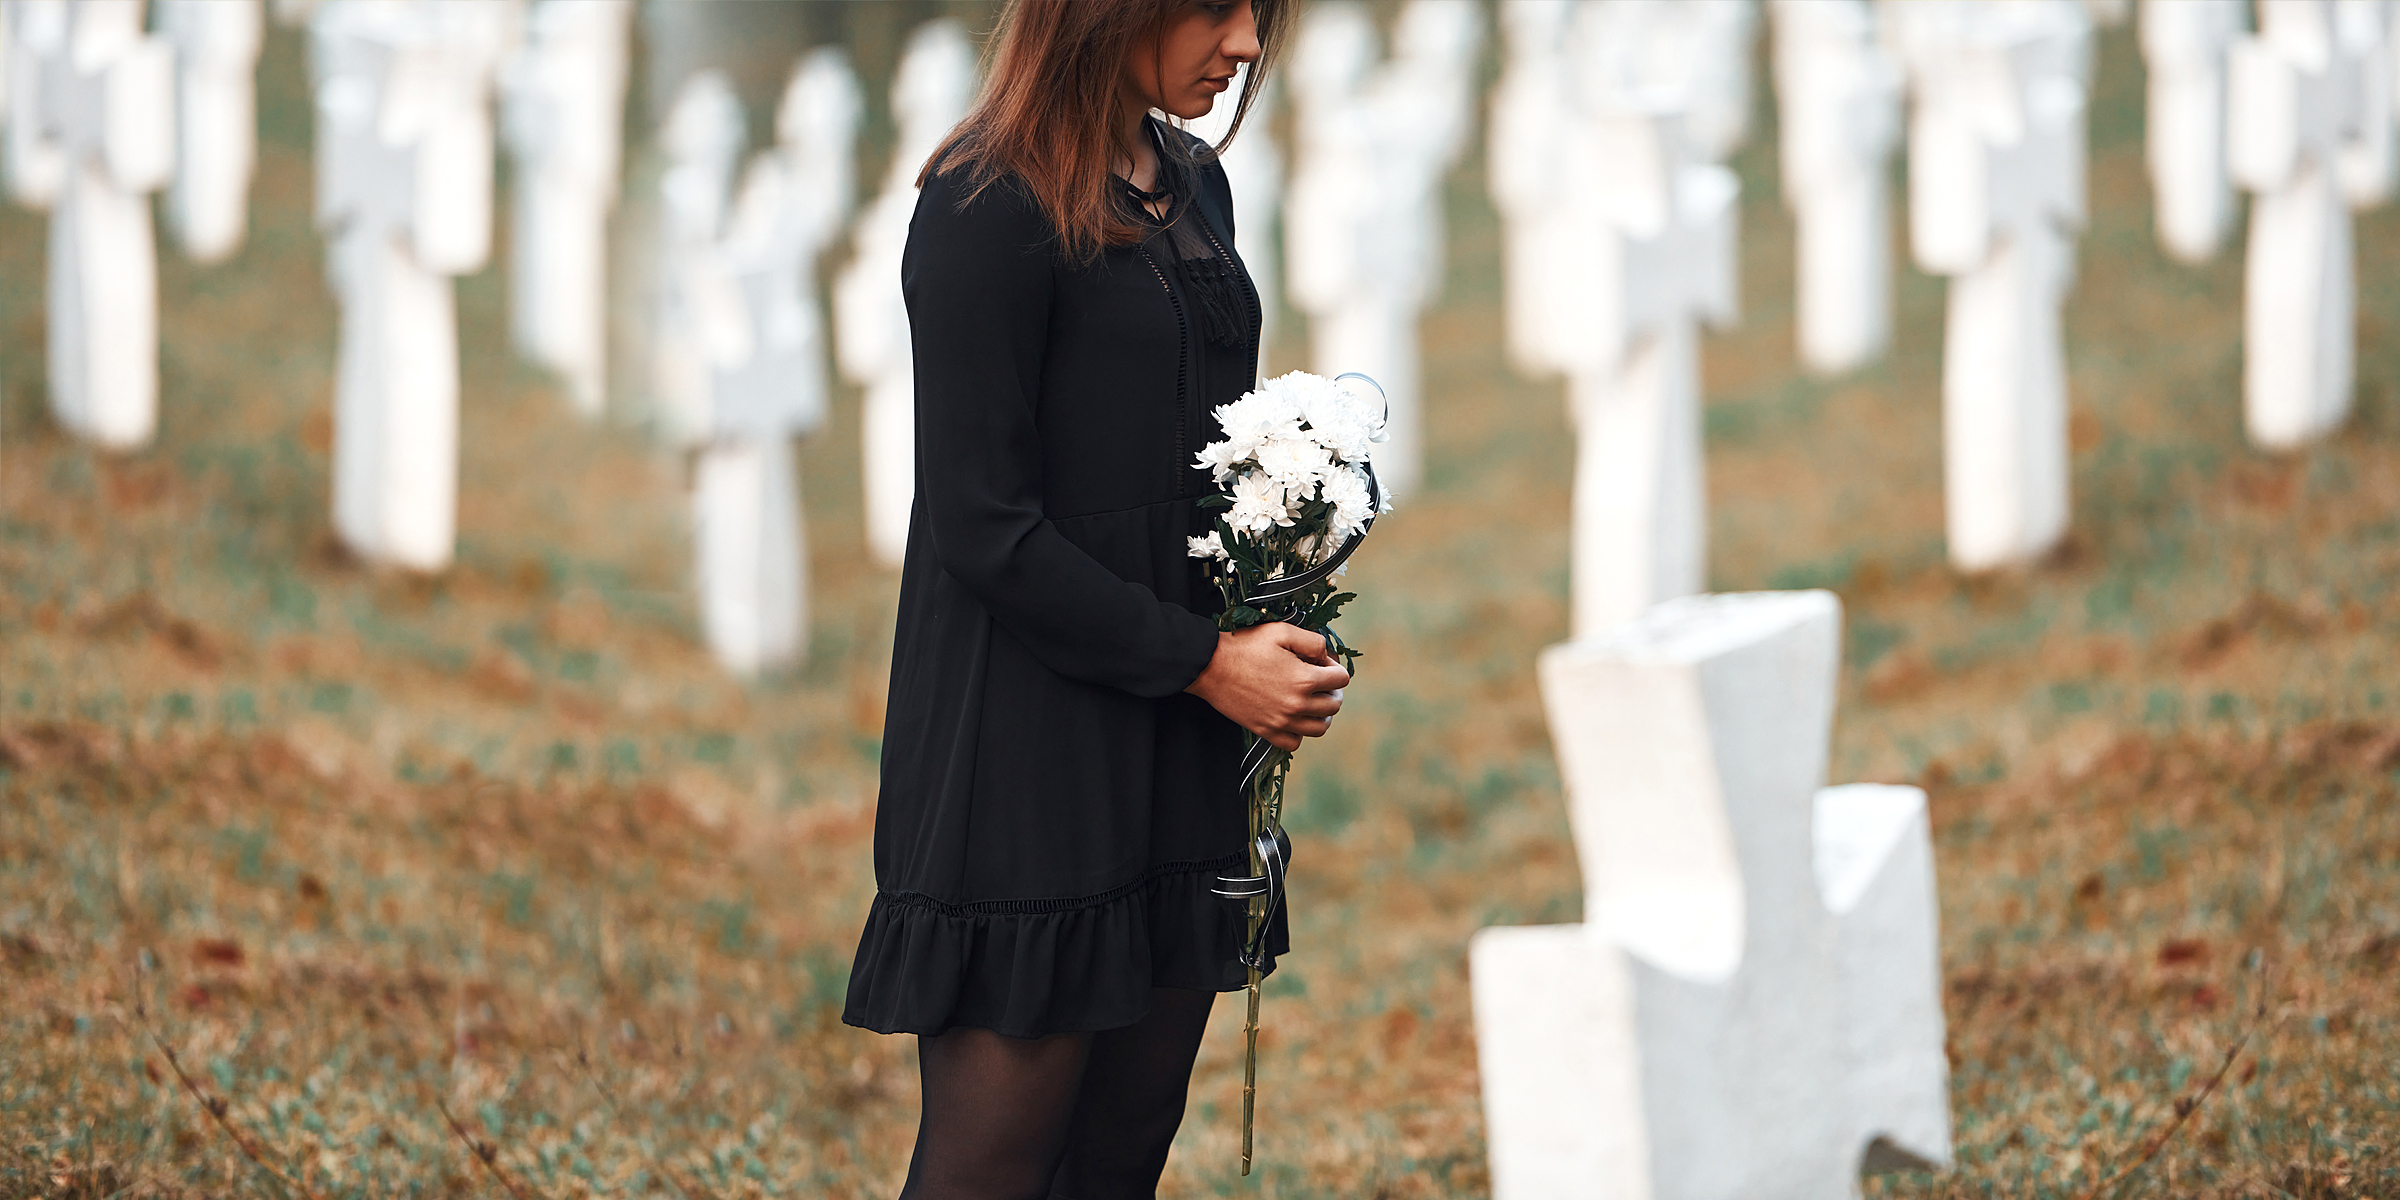 A Lady Attending a Funeral | Source: Shutterstock